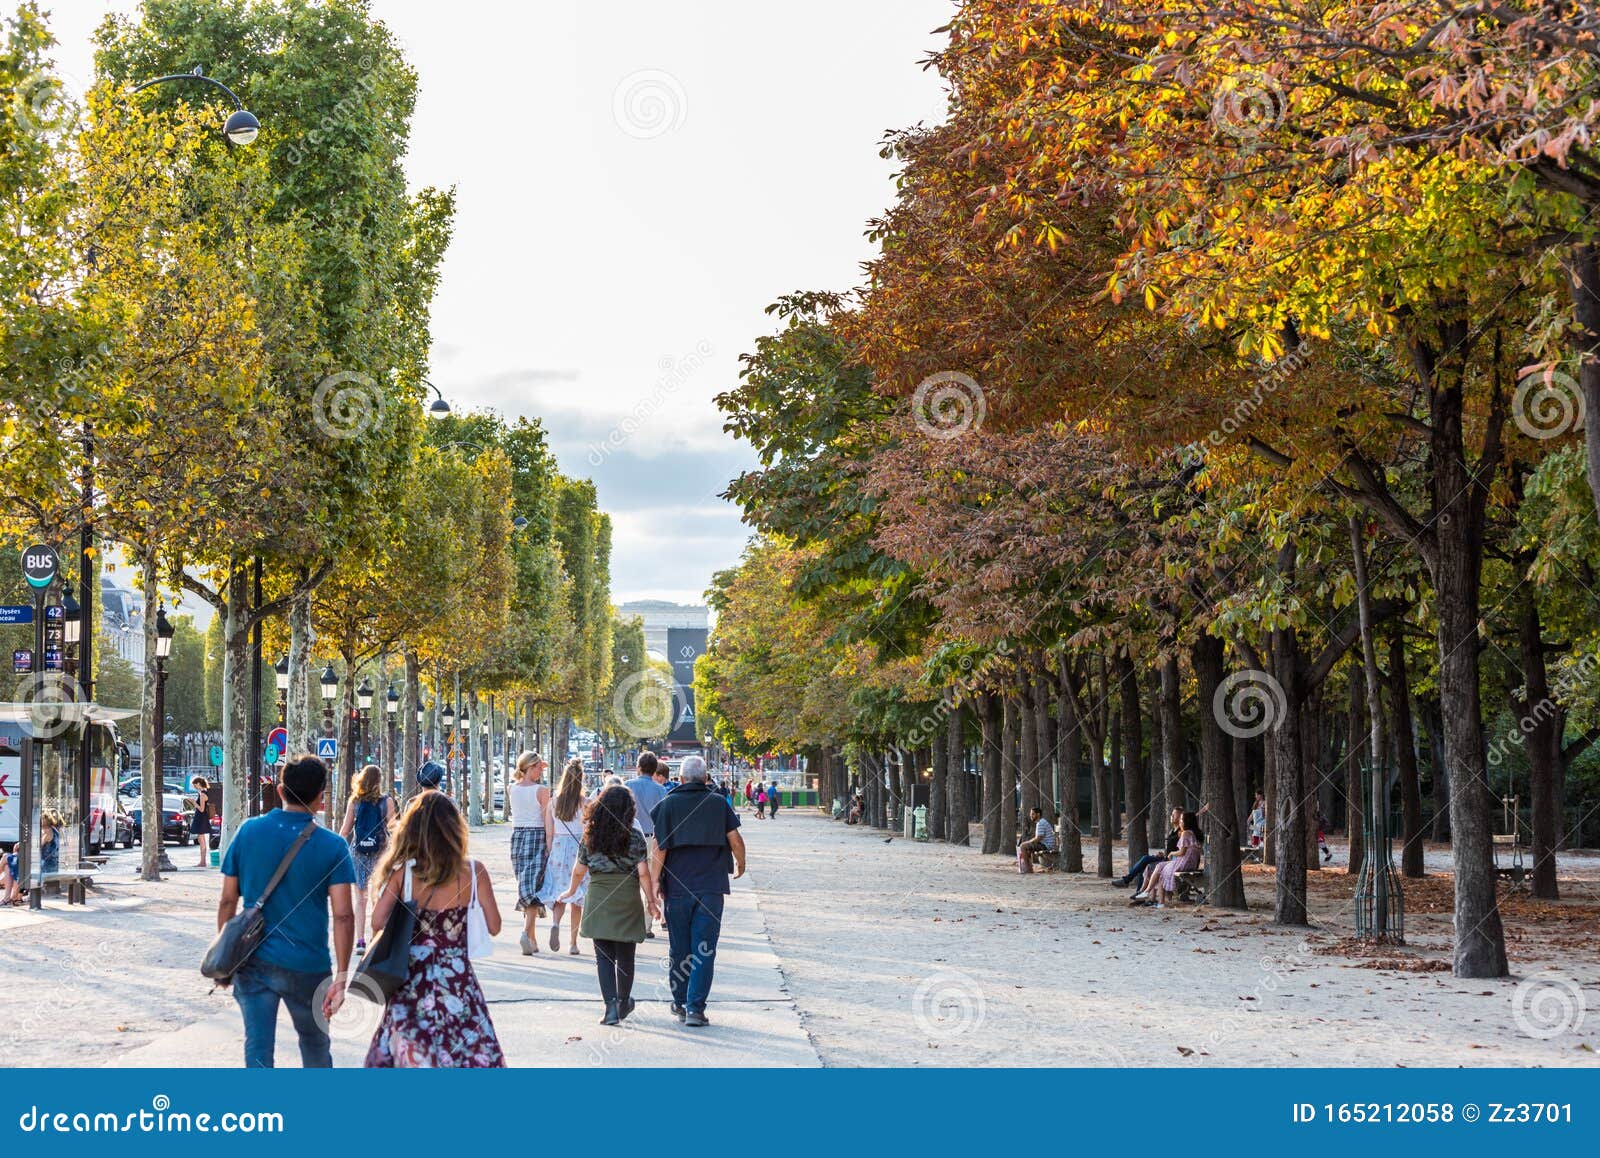 Street View of Champs-Elysees Avenue with Lots of Plane Trees in